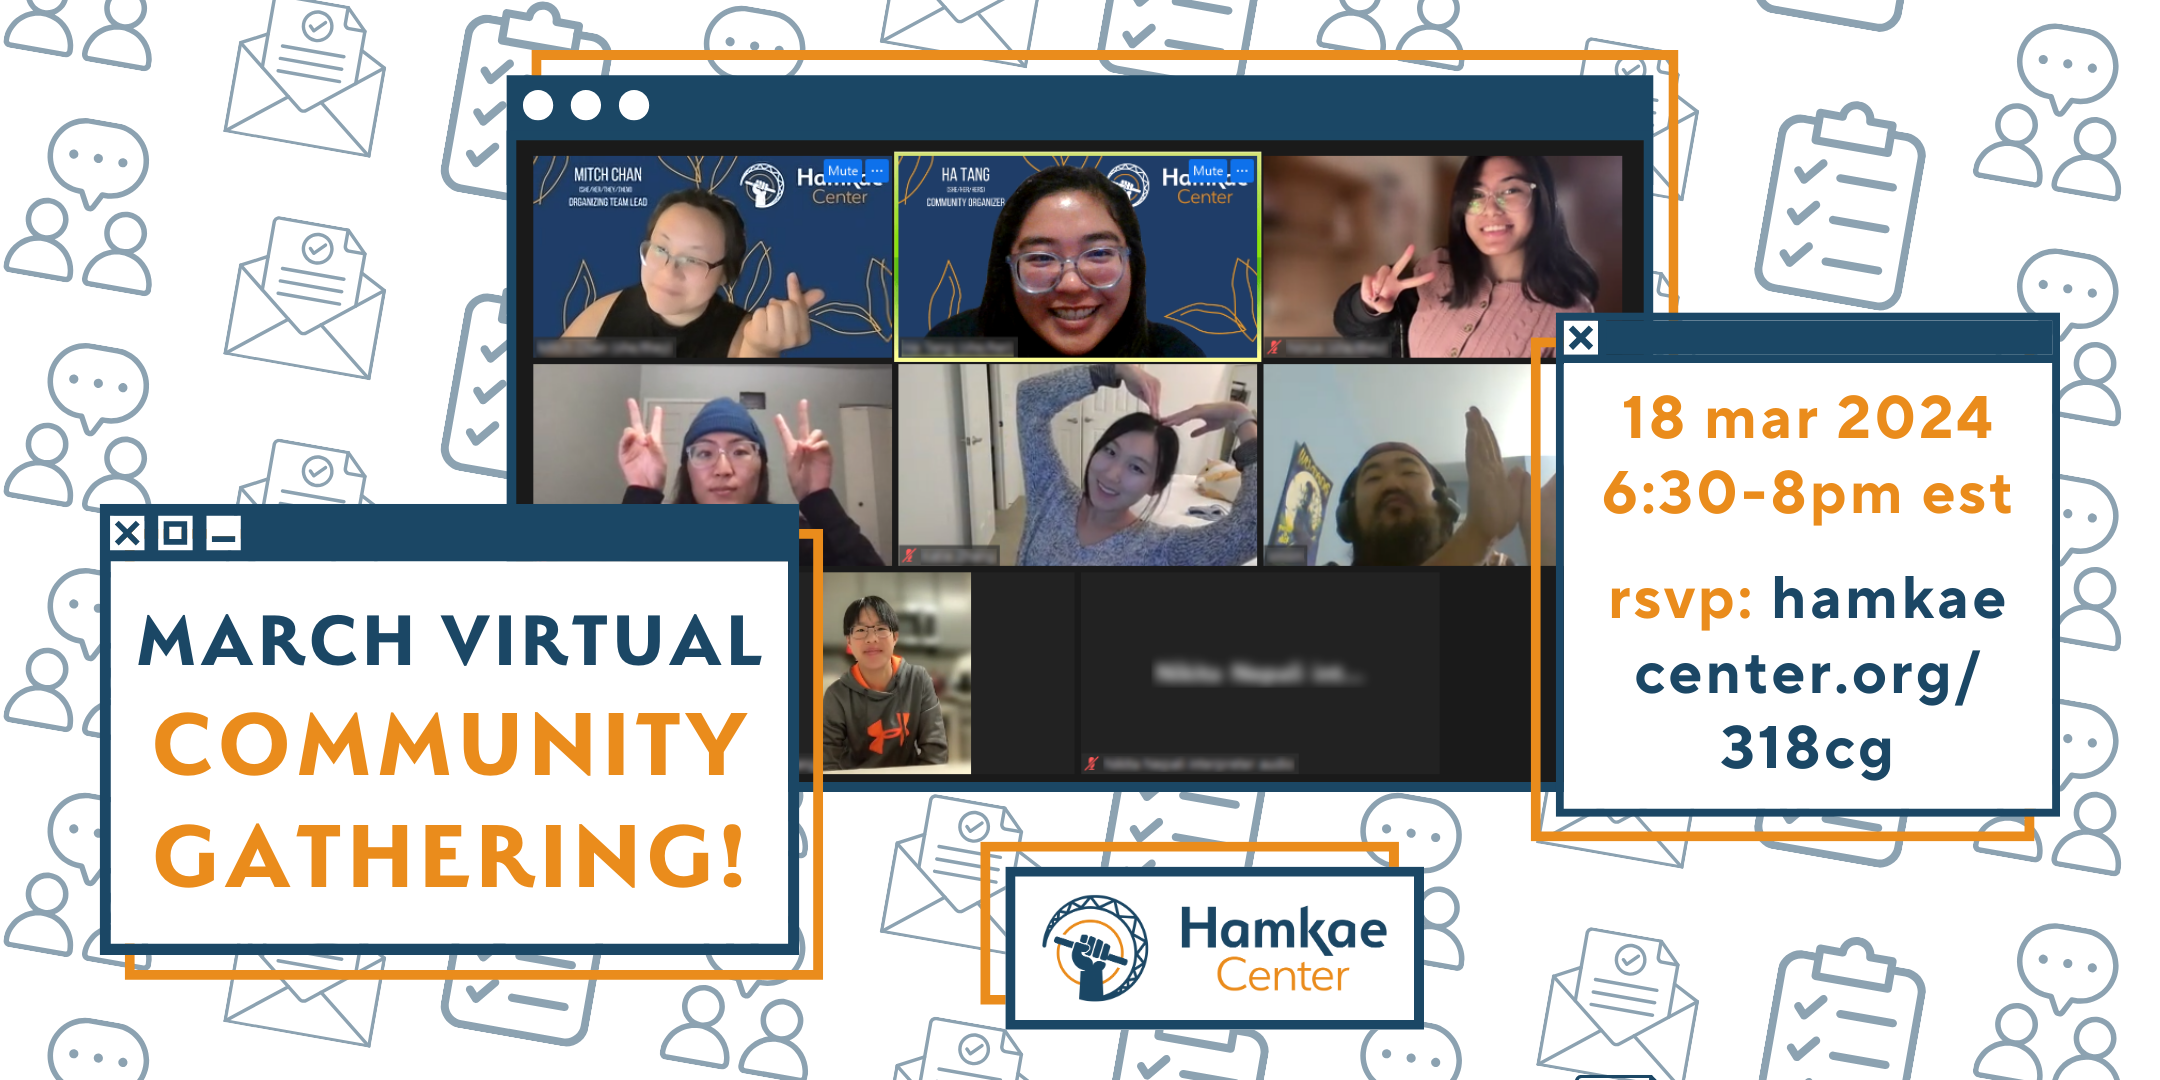 Graphic with a photo of Hamkae Center staff and community members making silly faces for a screenshot during a virtual meeting, advertising Hamkae Center's March Virtual Community Gathering on March 18, 2024 at 6:30-8pm. RSVP: hamkaecenter.org/318cg